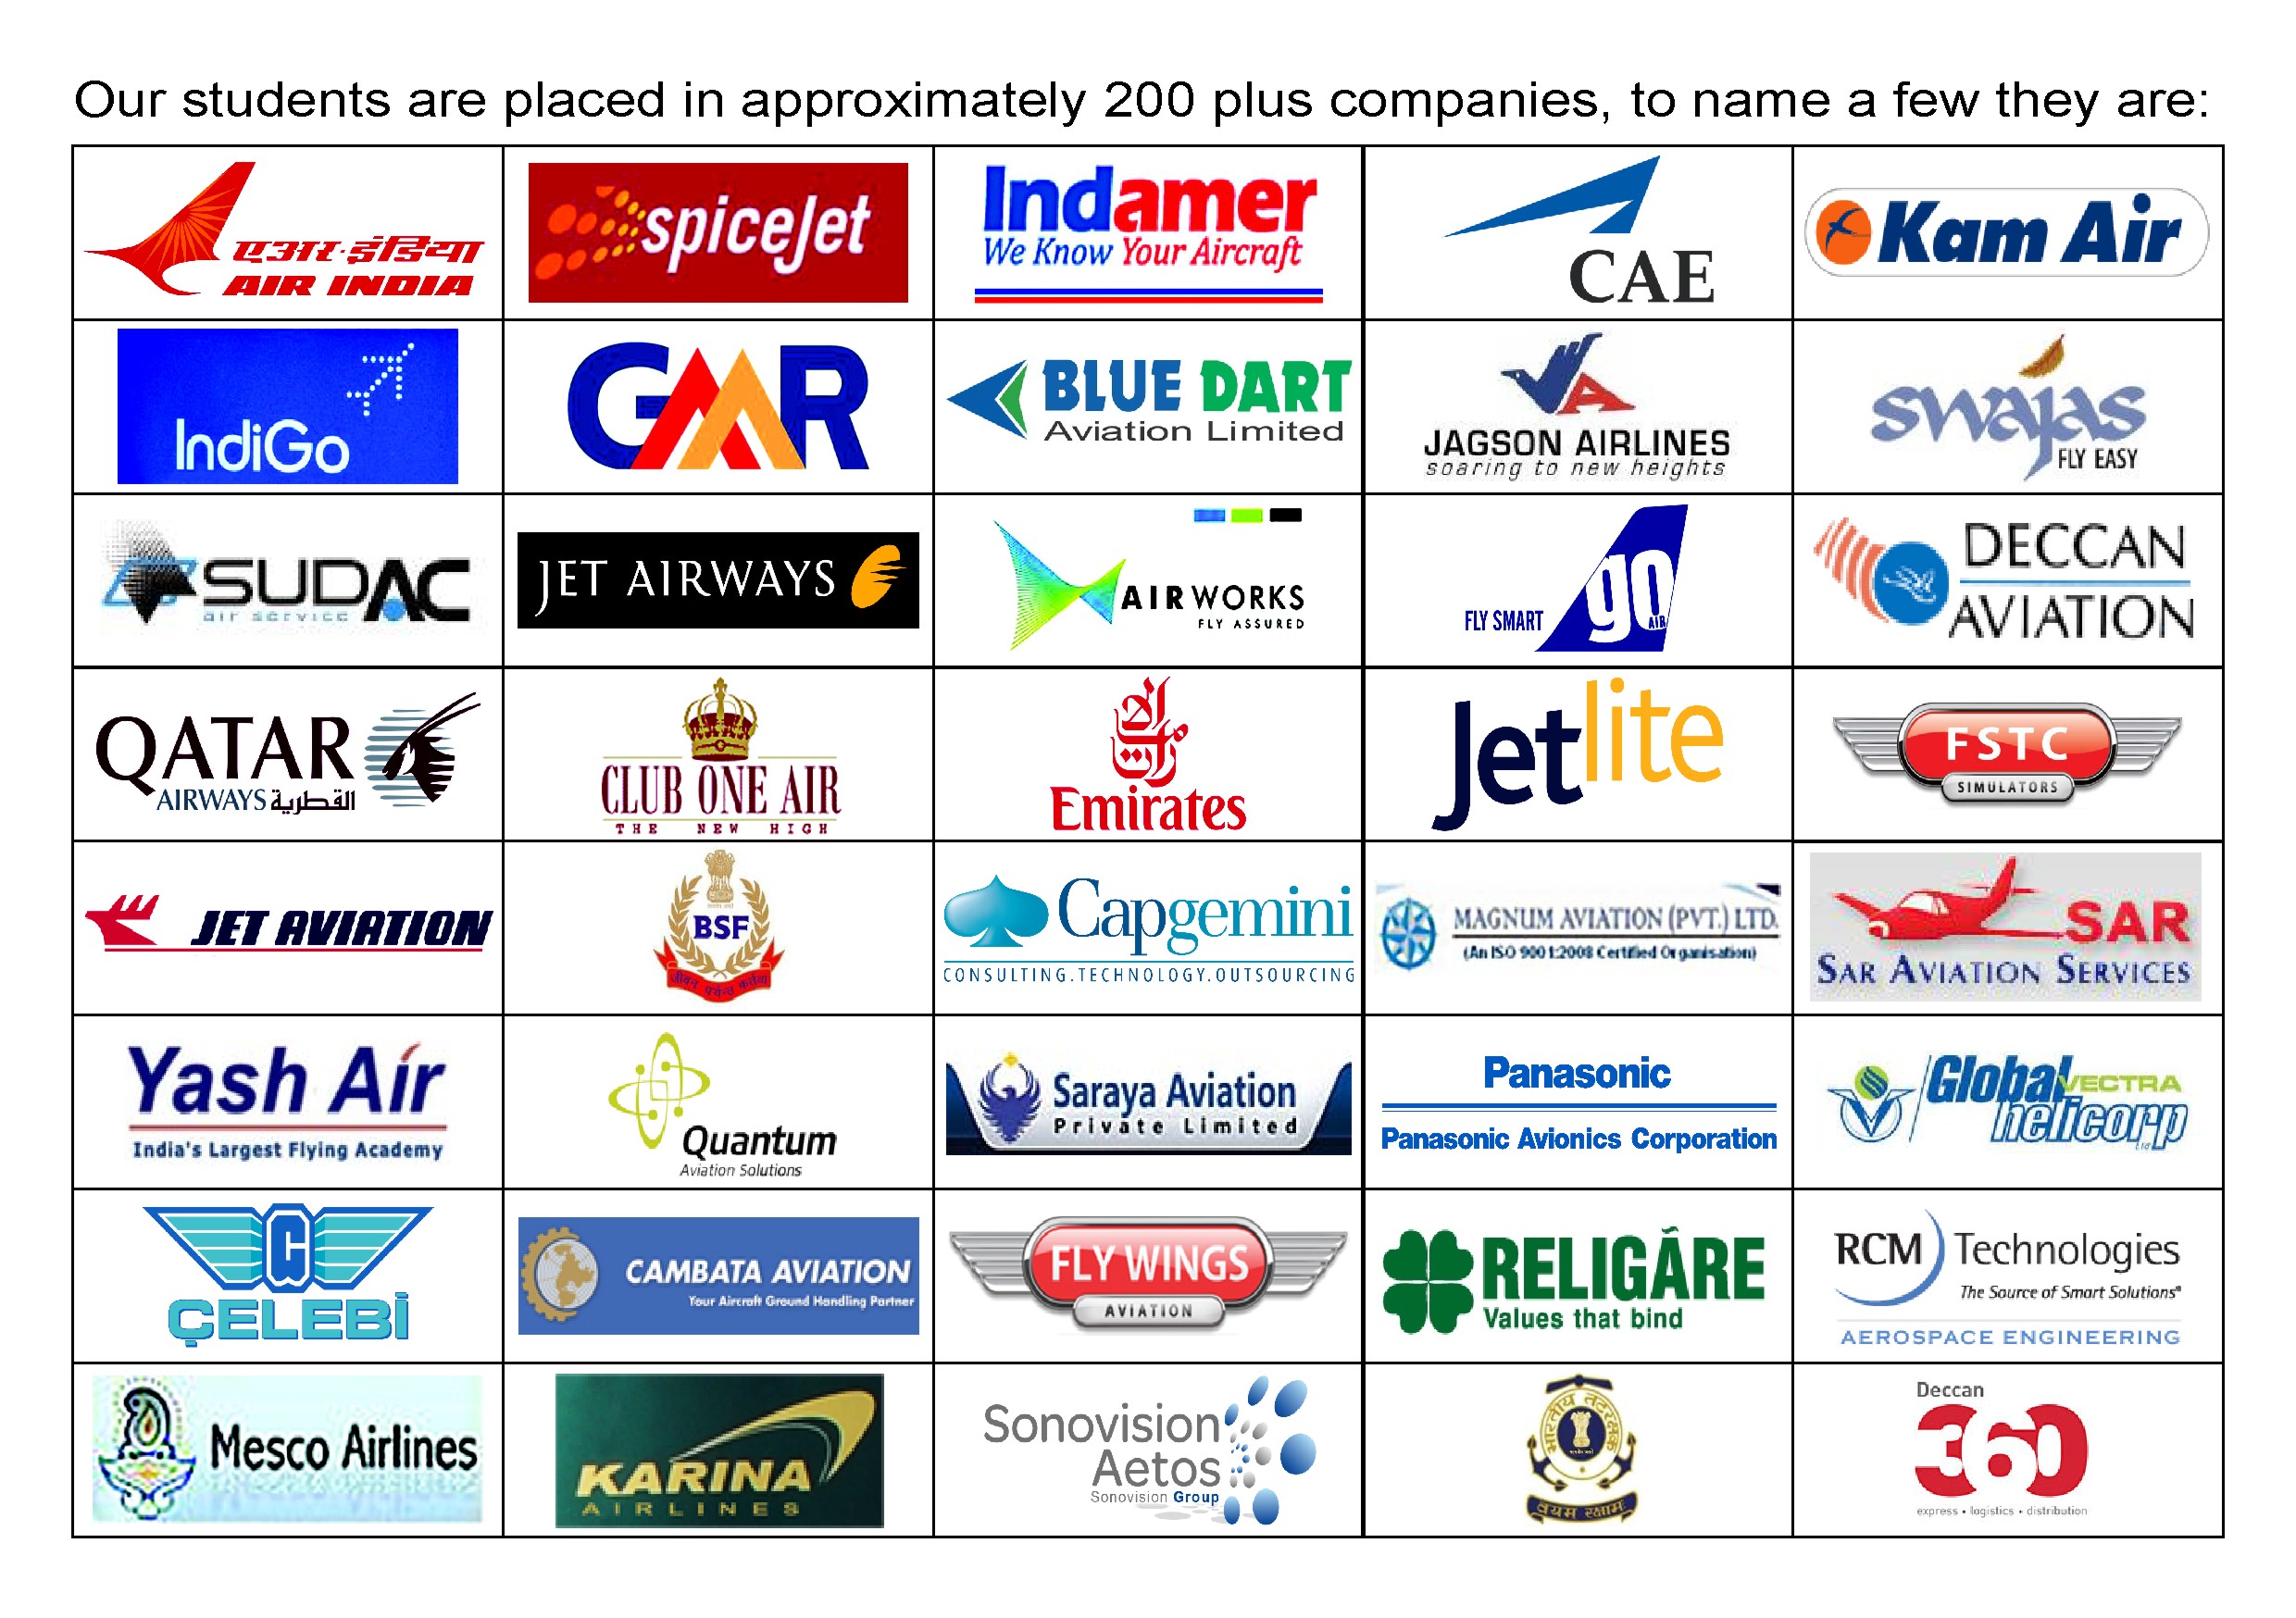 OUR STUDENTS OF AERONAUTICAL ENGINEERING & AIRCRAFT MAINTENANCE ENGINEERING ARE WORKING IN 200 PLUS COMPANIES 